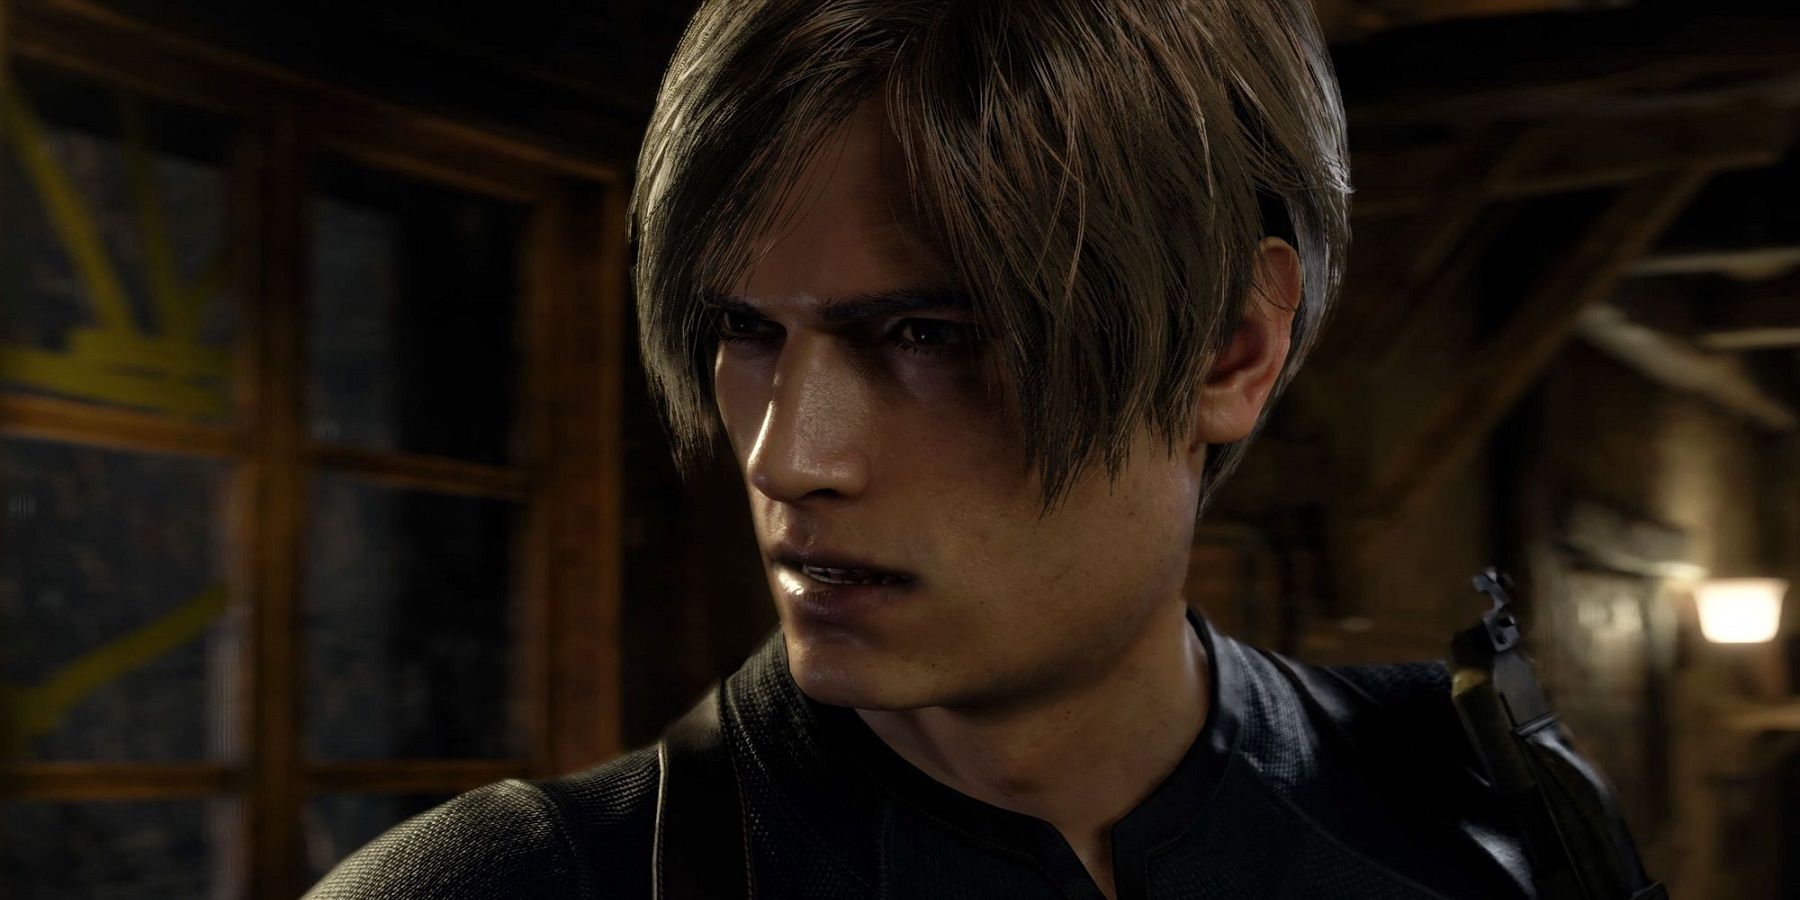 My Ada is a survivor' – Resident Evil 4 actor responds to harassment